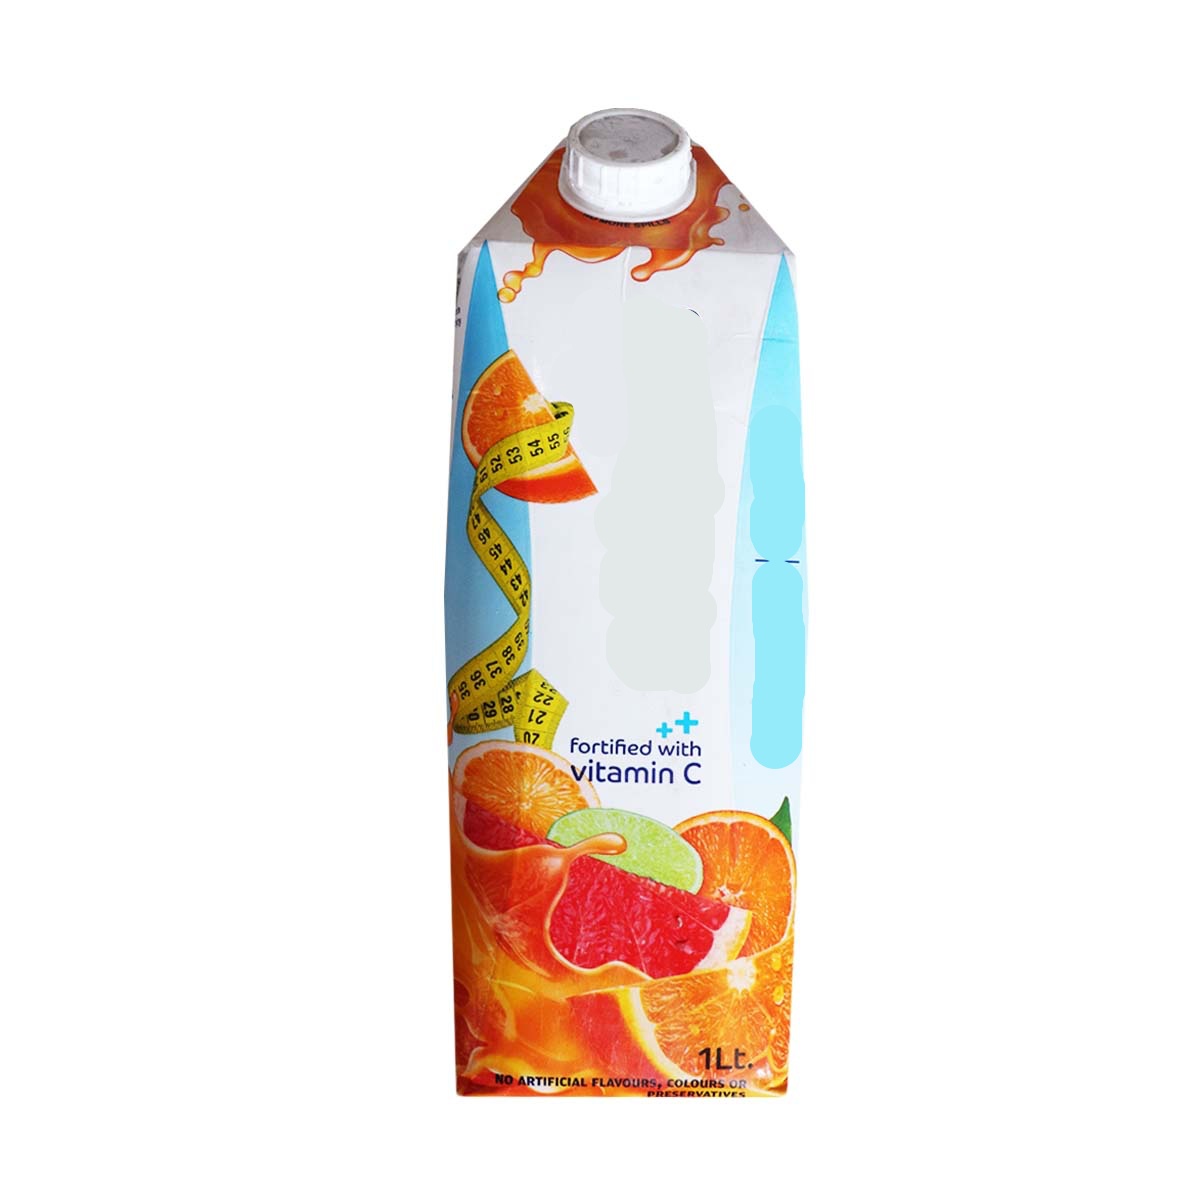 What brand of juice is this?